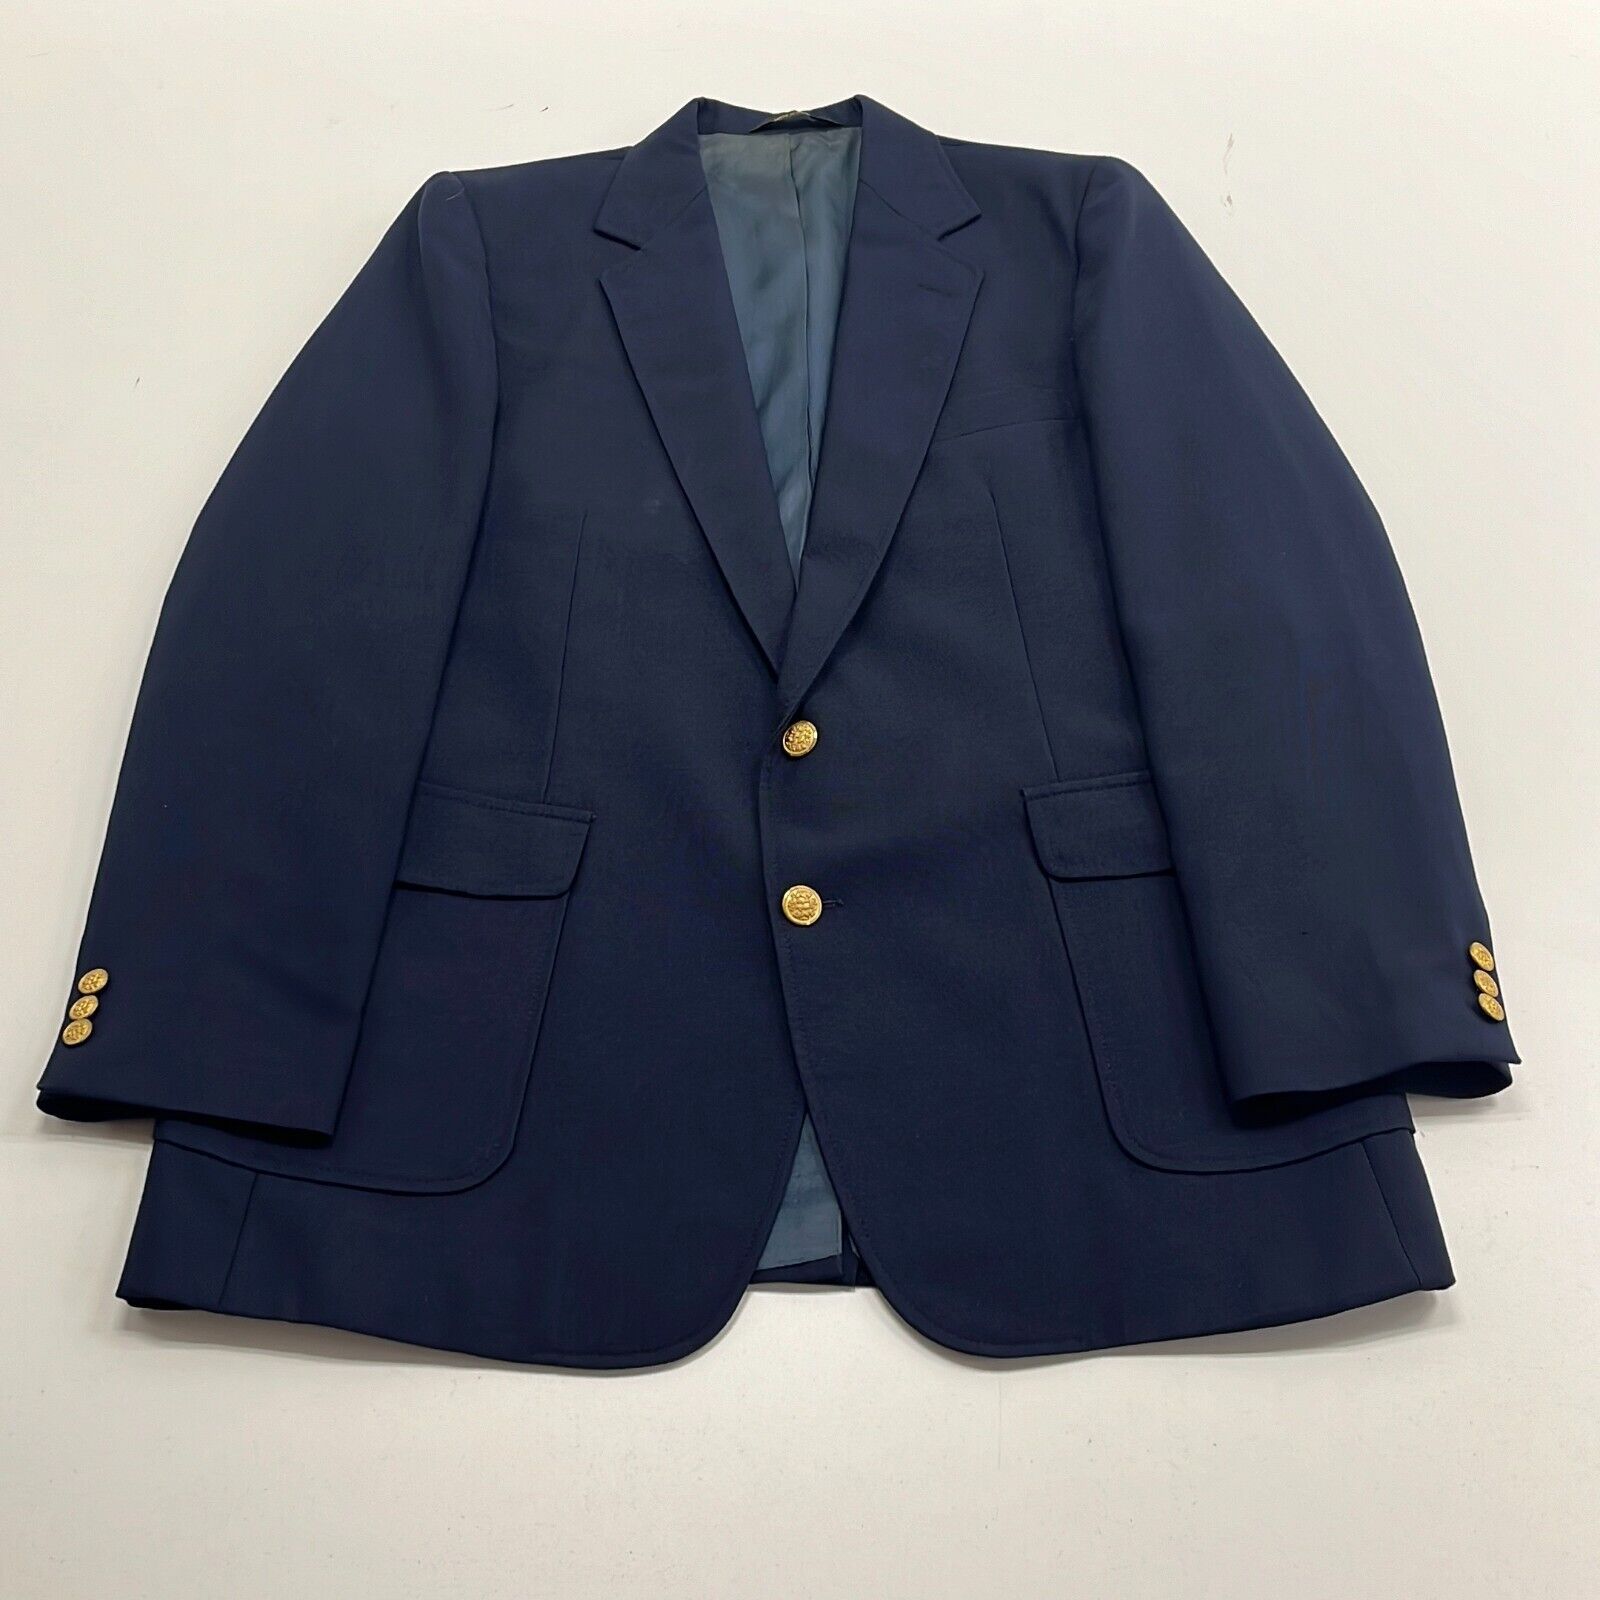 Imperial Haggar Men's Blue Long Sleeve Single-Breasted Blazer 43" Chest